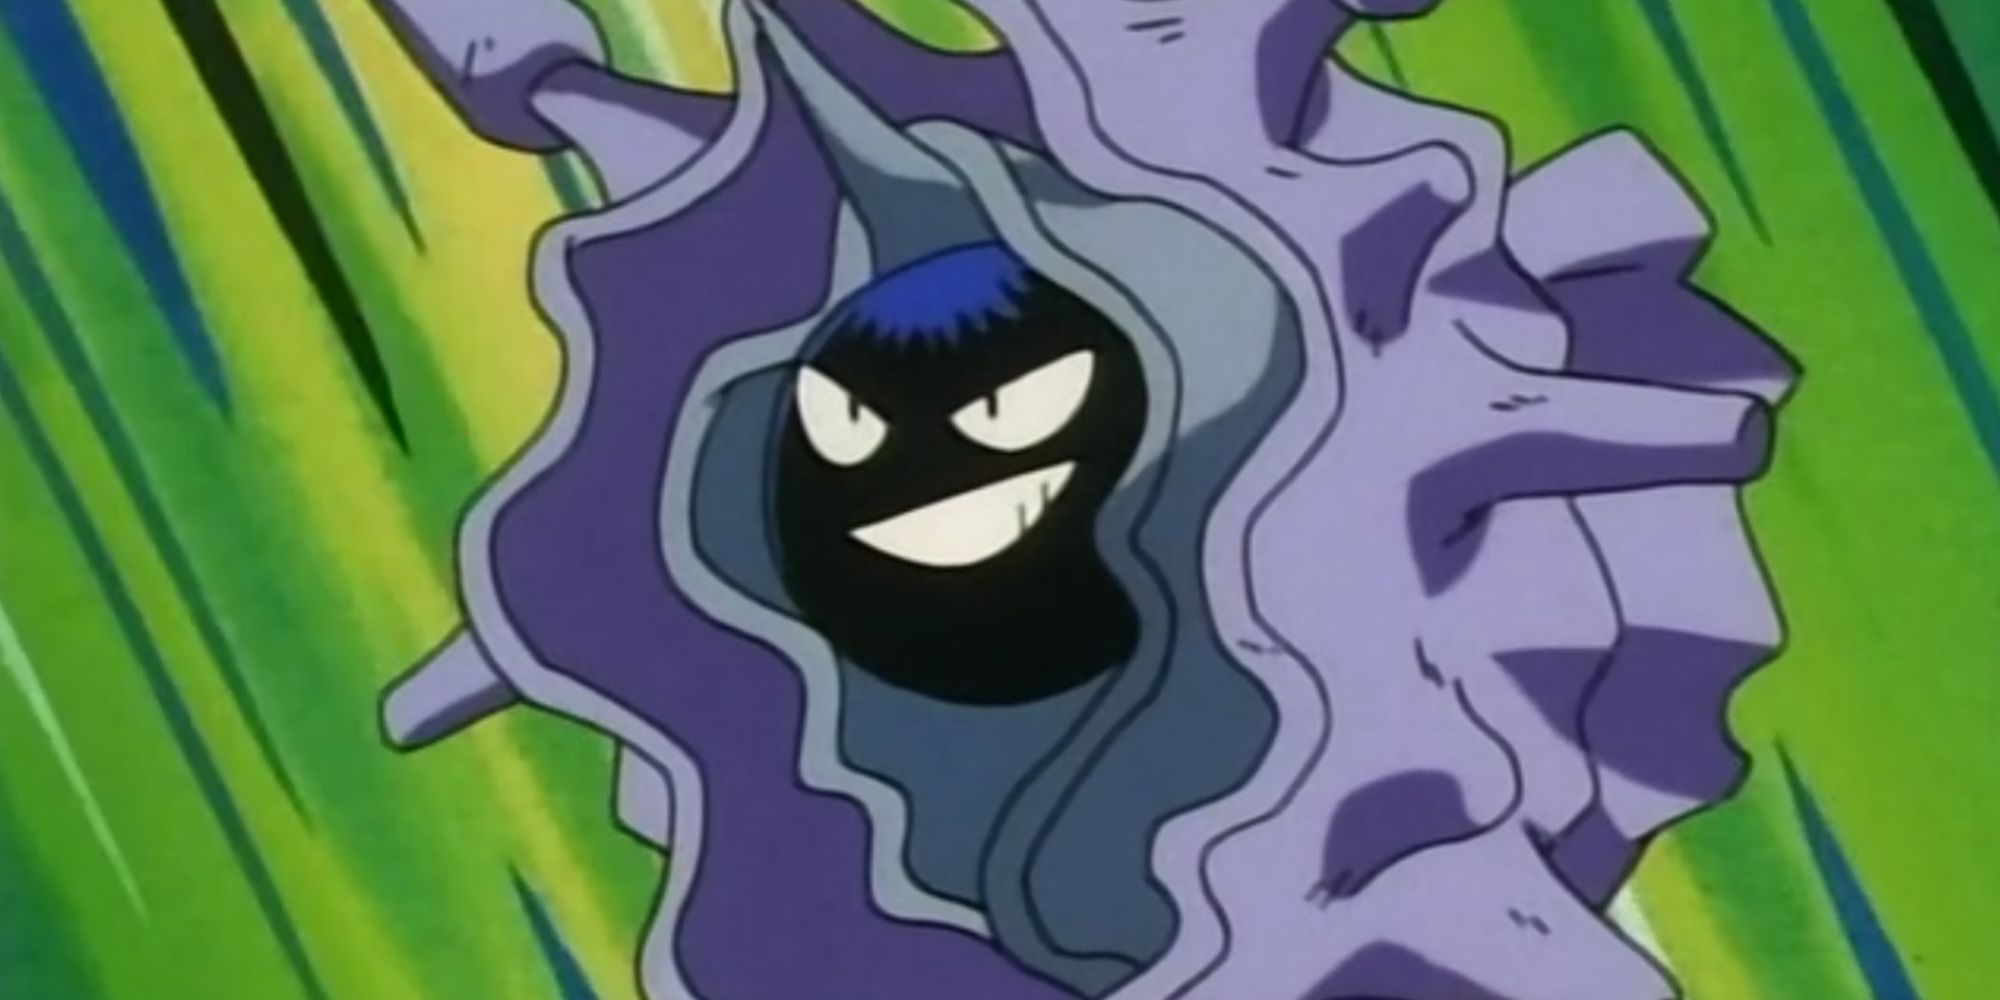 Cloyster smiling while attacking the Pokemon anime series